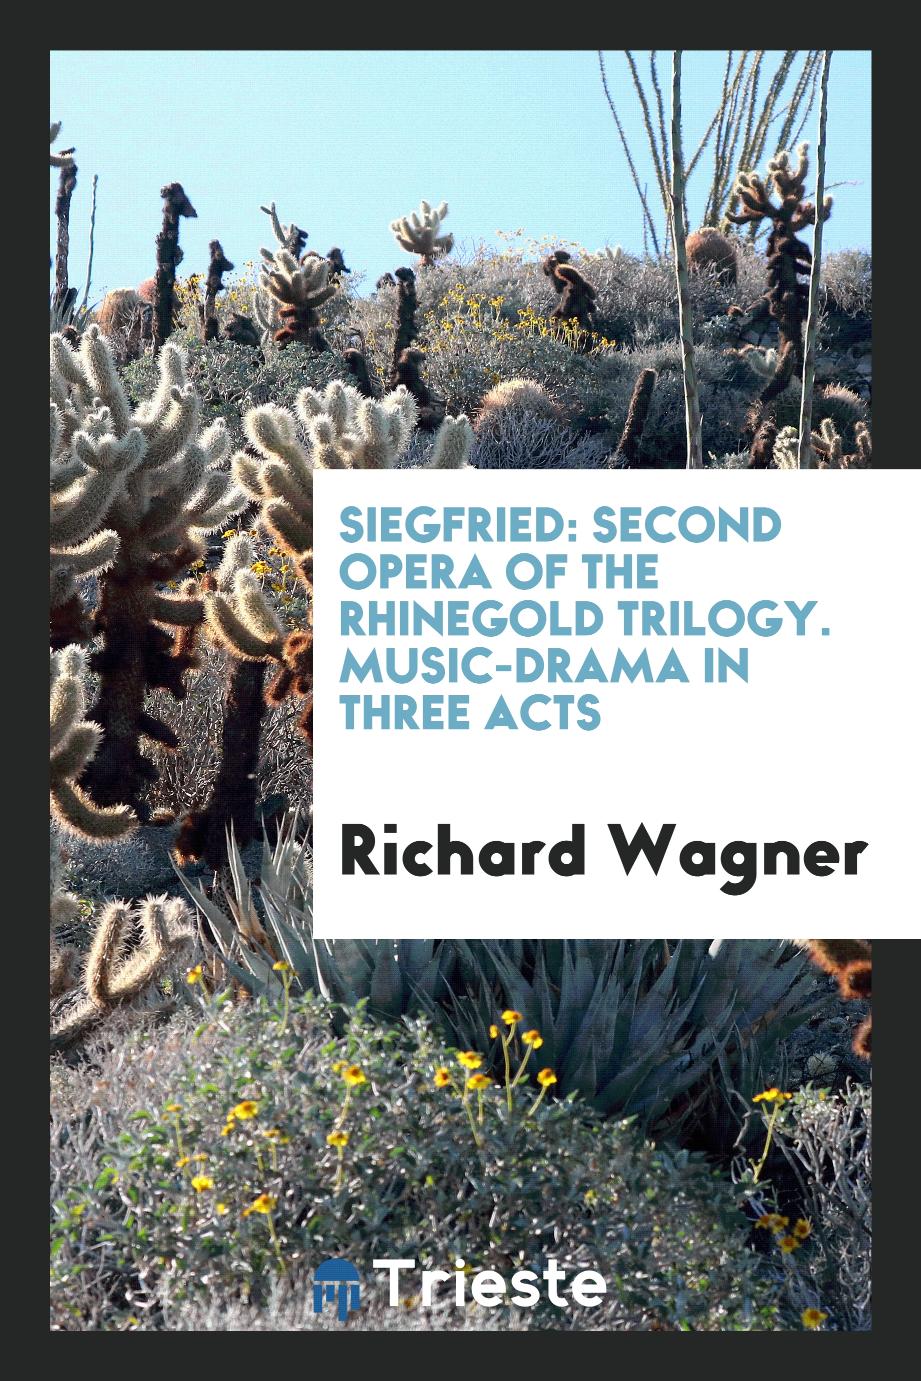 Siegfried: Second Opera of the Rhinegold Trilogy. Music-drama in Three Acts